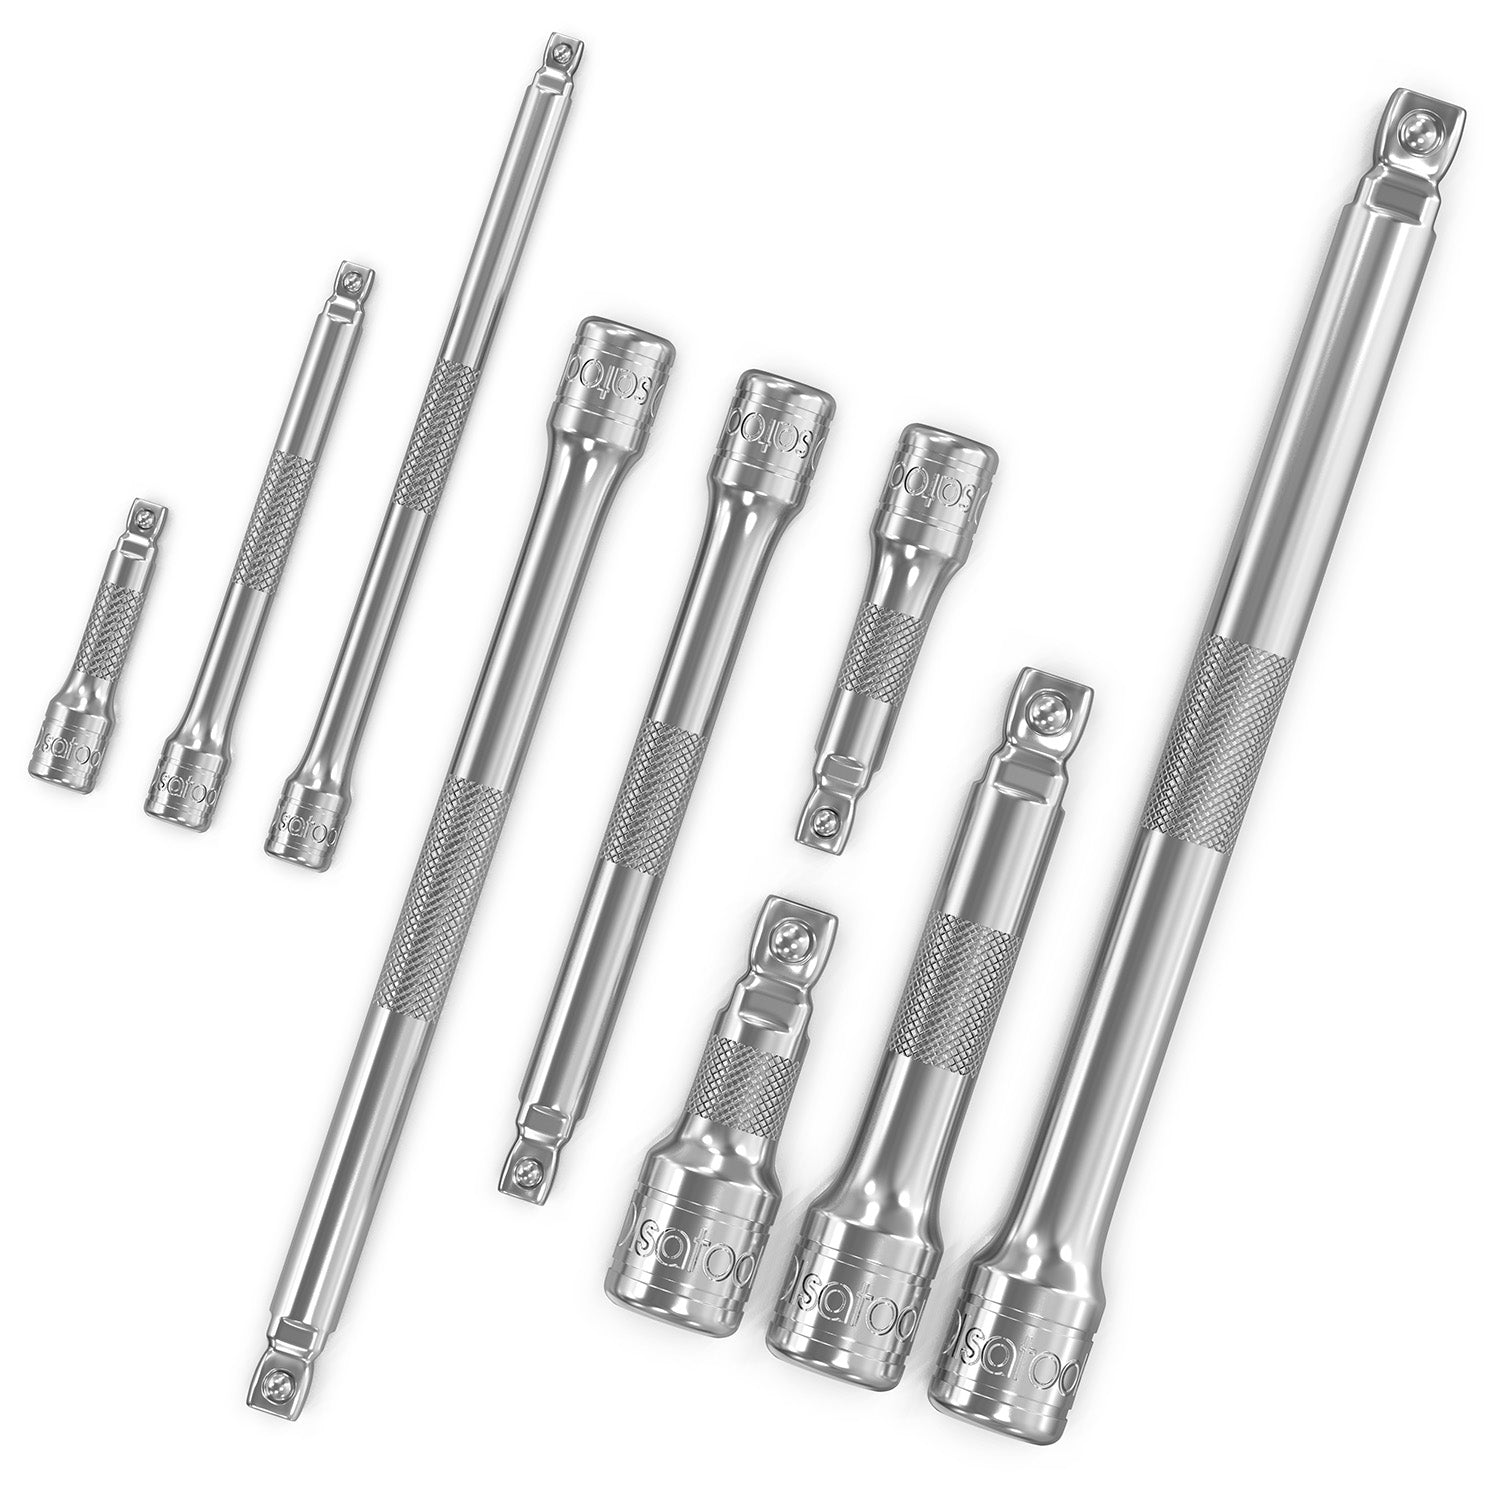 9PC WOBBLE BAR SOCKET WRENCH SET EXTRA LONG EXTENSION TOOL 1/4 3/8 1/2  DRIVE